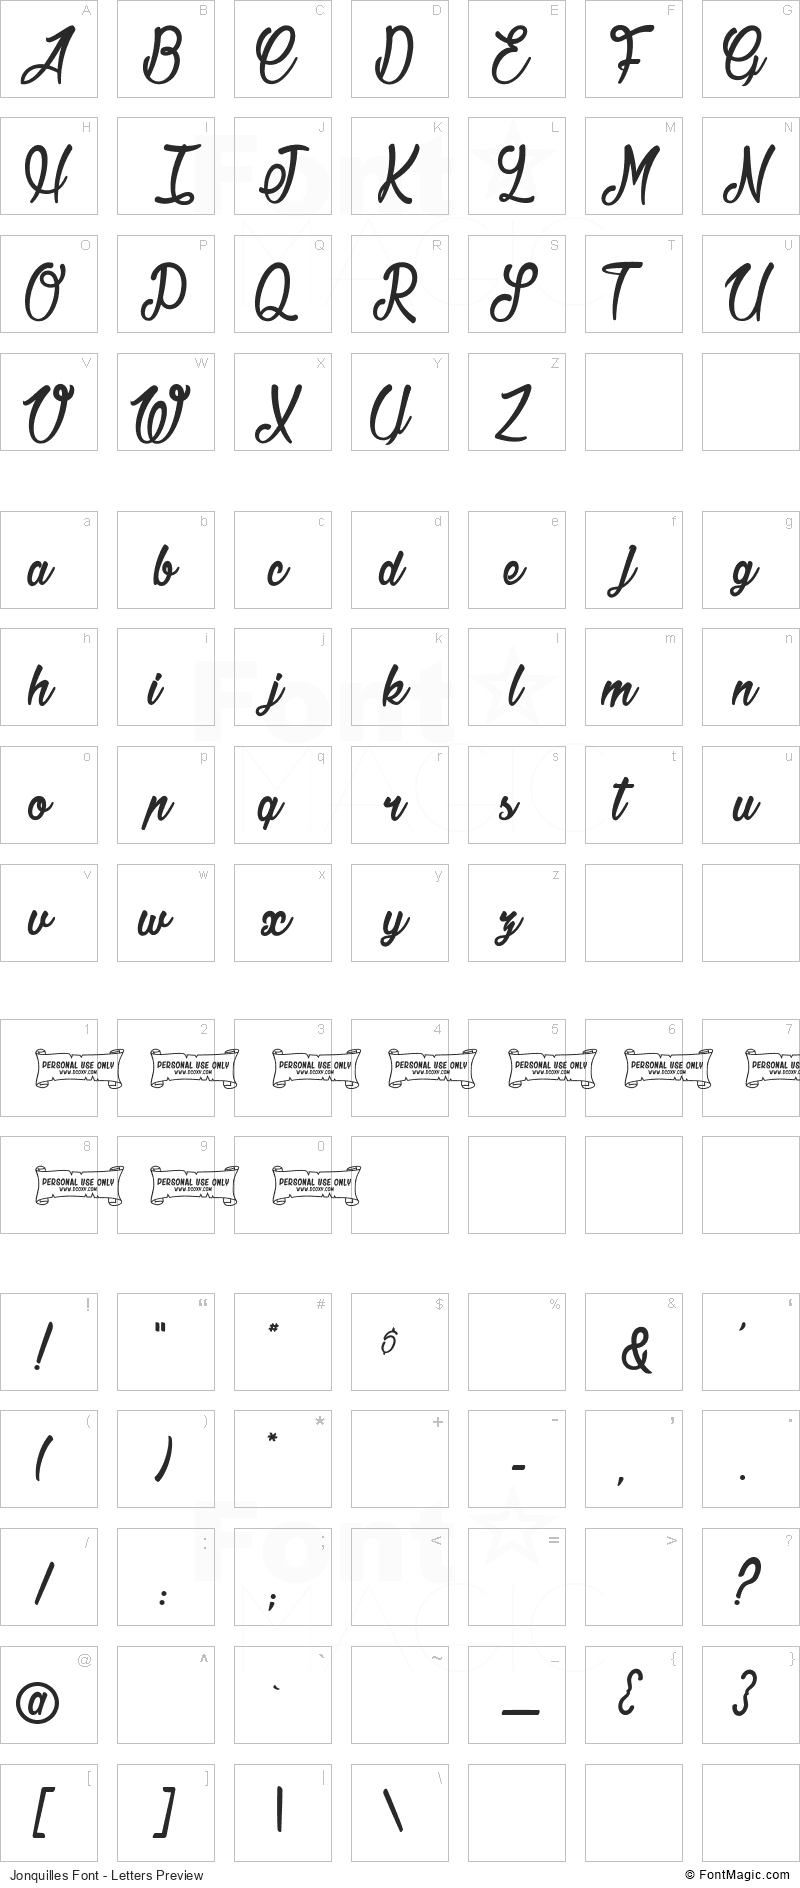 Jonquilles Font - All Latters Preview Chart